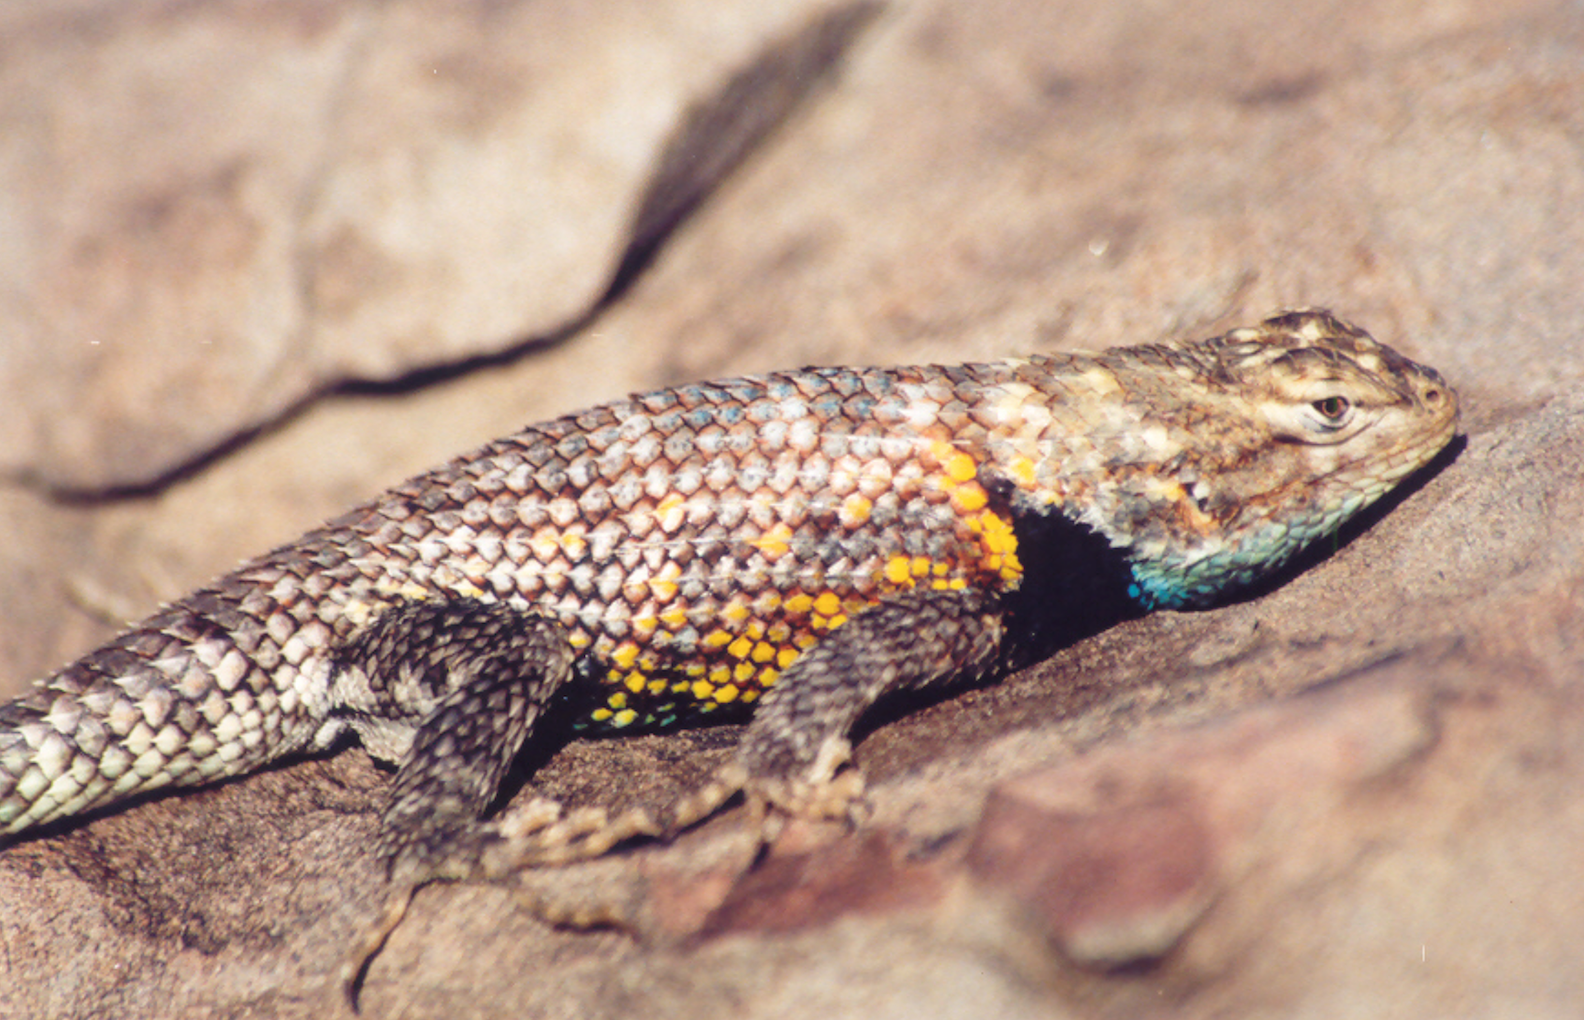 Figure 4. A desert spiny lizard was found using a woodrat burrow within a prickly pear cactus